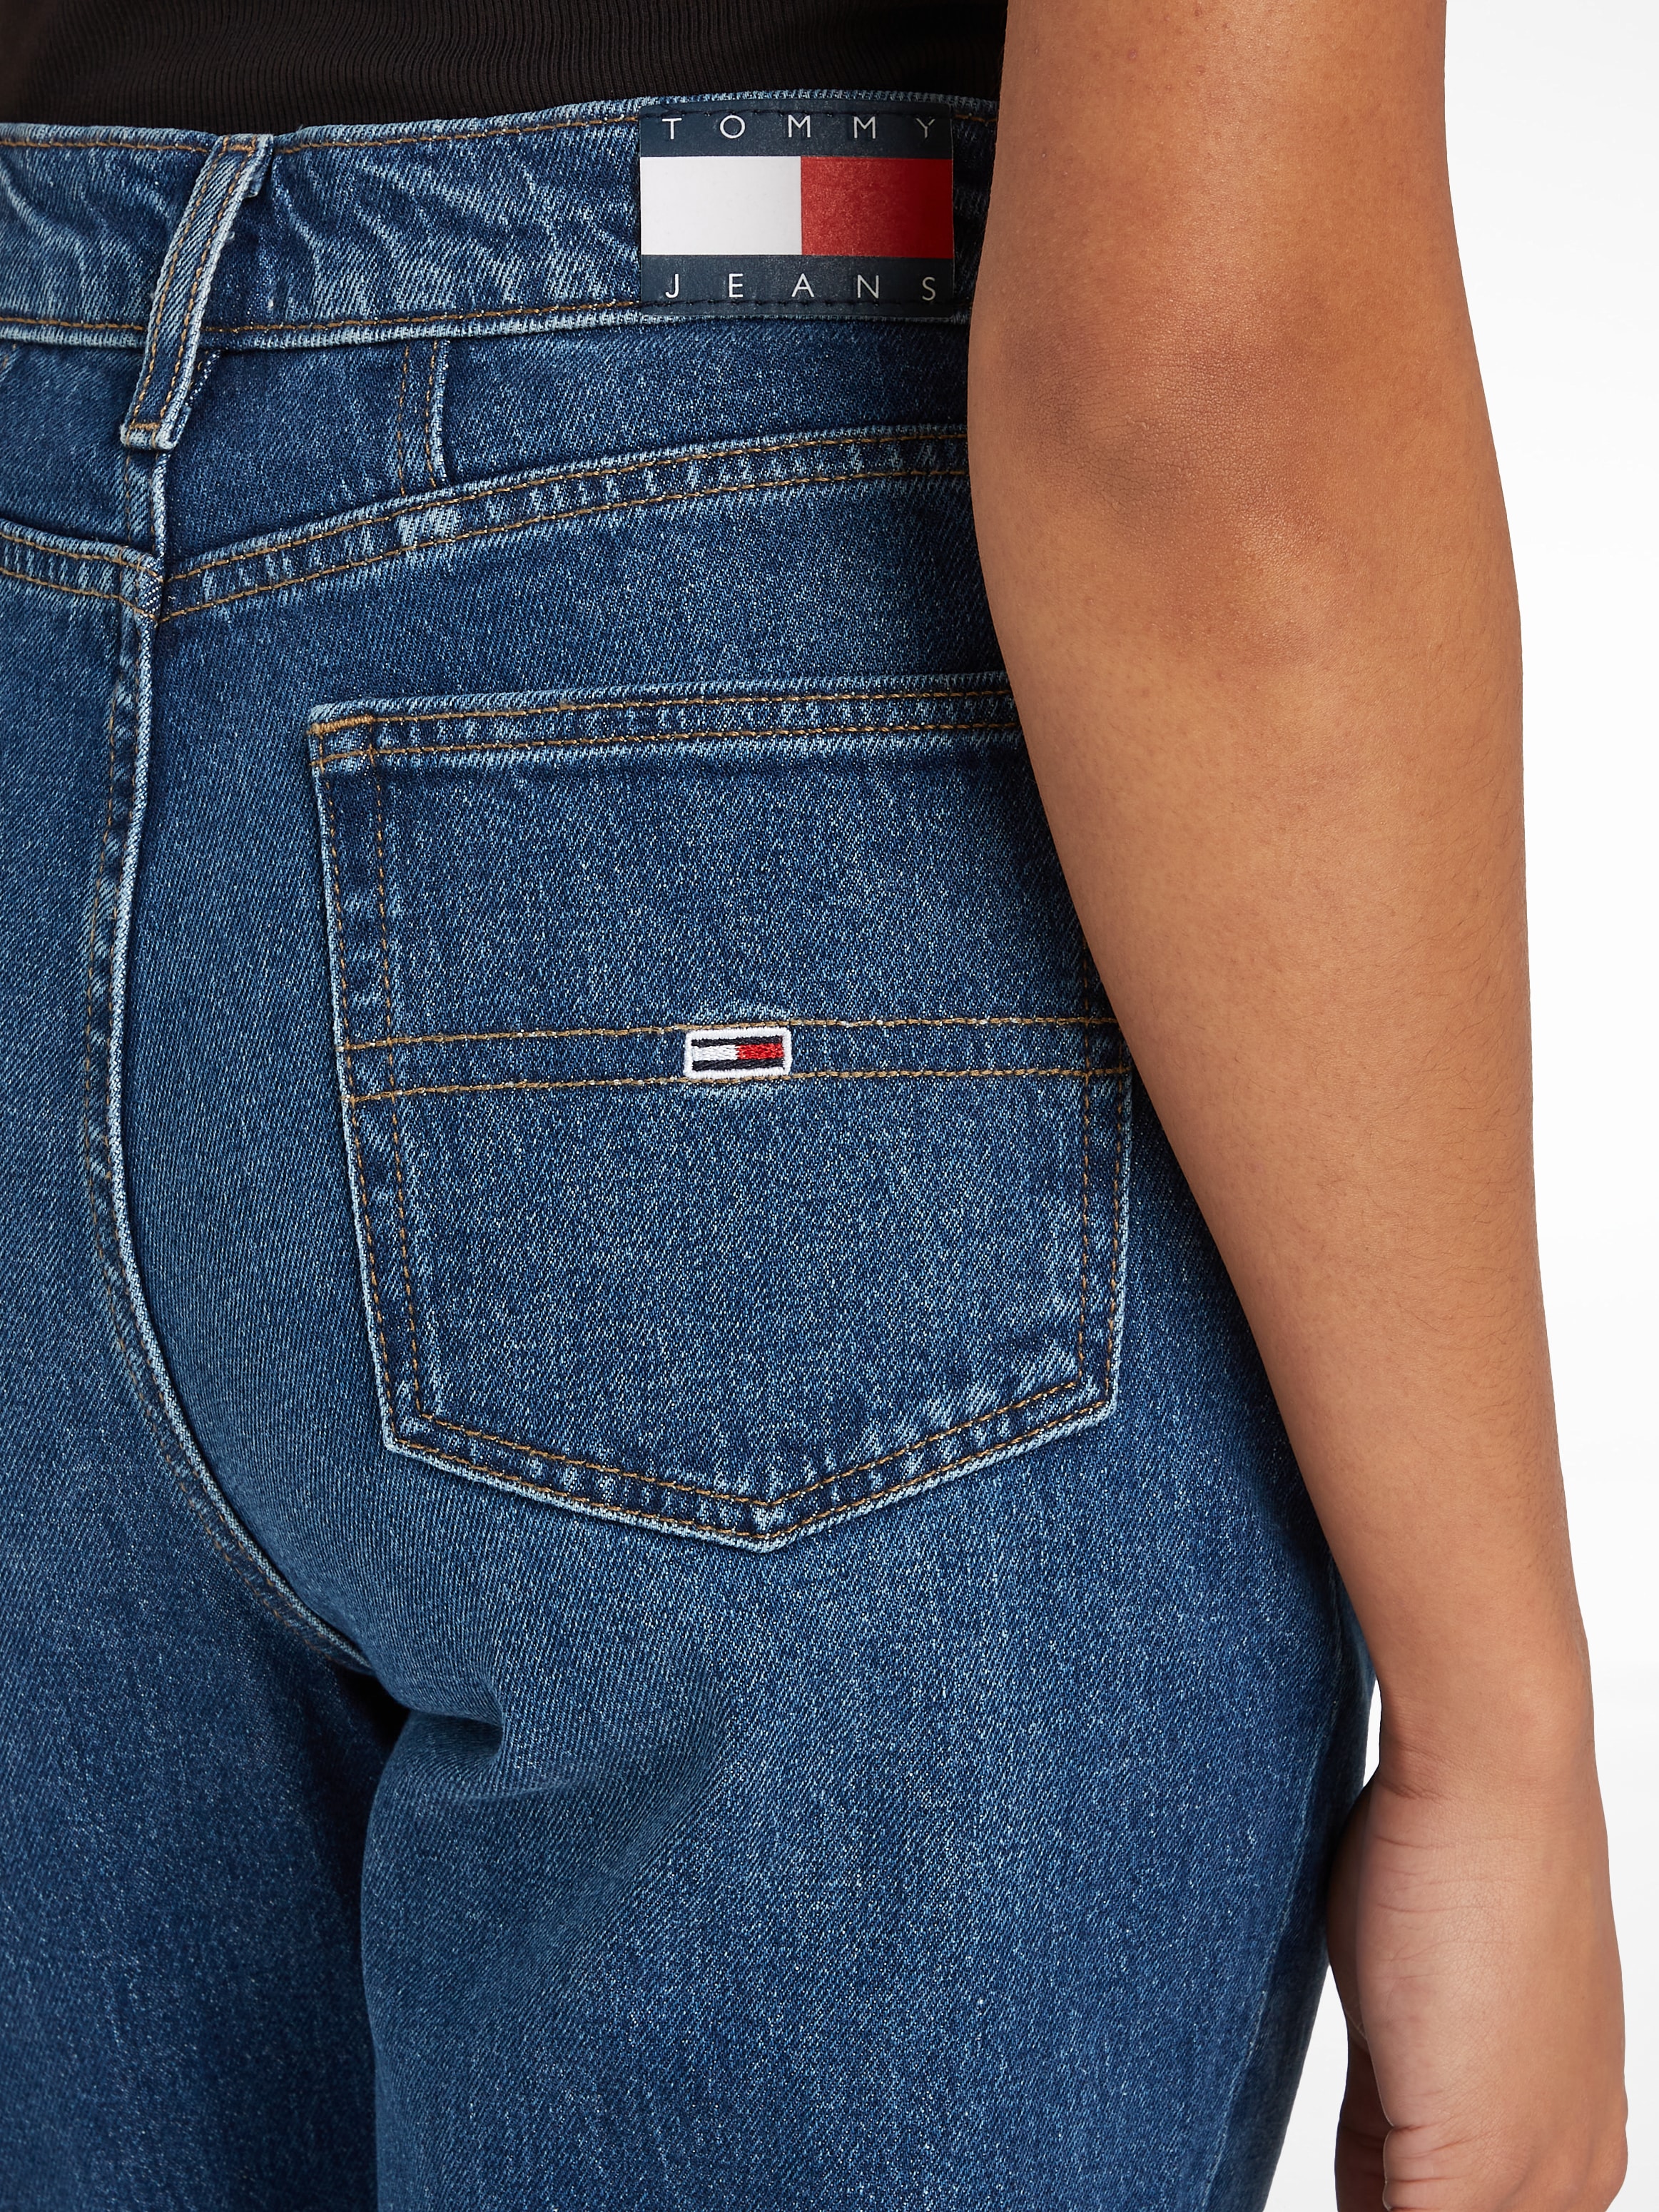 Tommy Jeans Mom-Jeans »Tommy Jeans - High waist - Mom-Jeans«, Mom Jeans mit hoher Taille und Tommy Jeans Logo-Badge